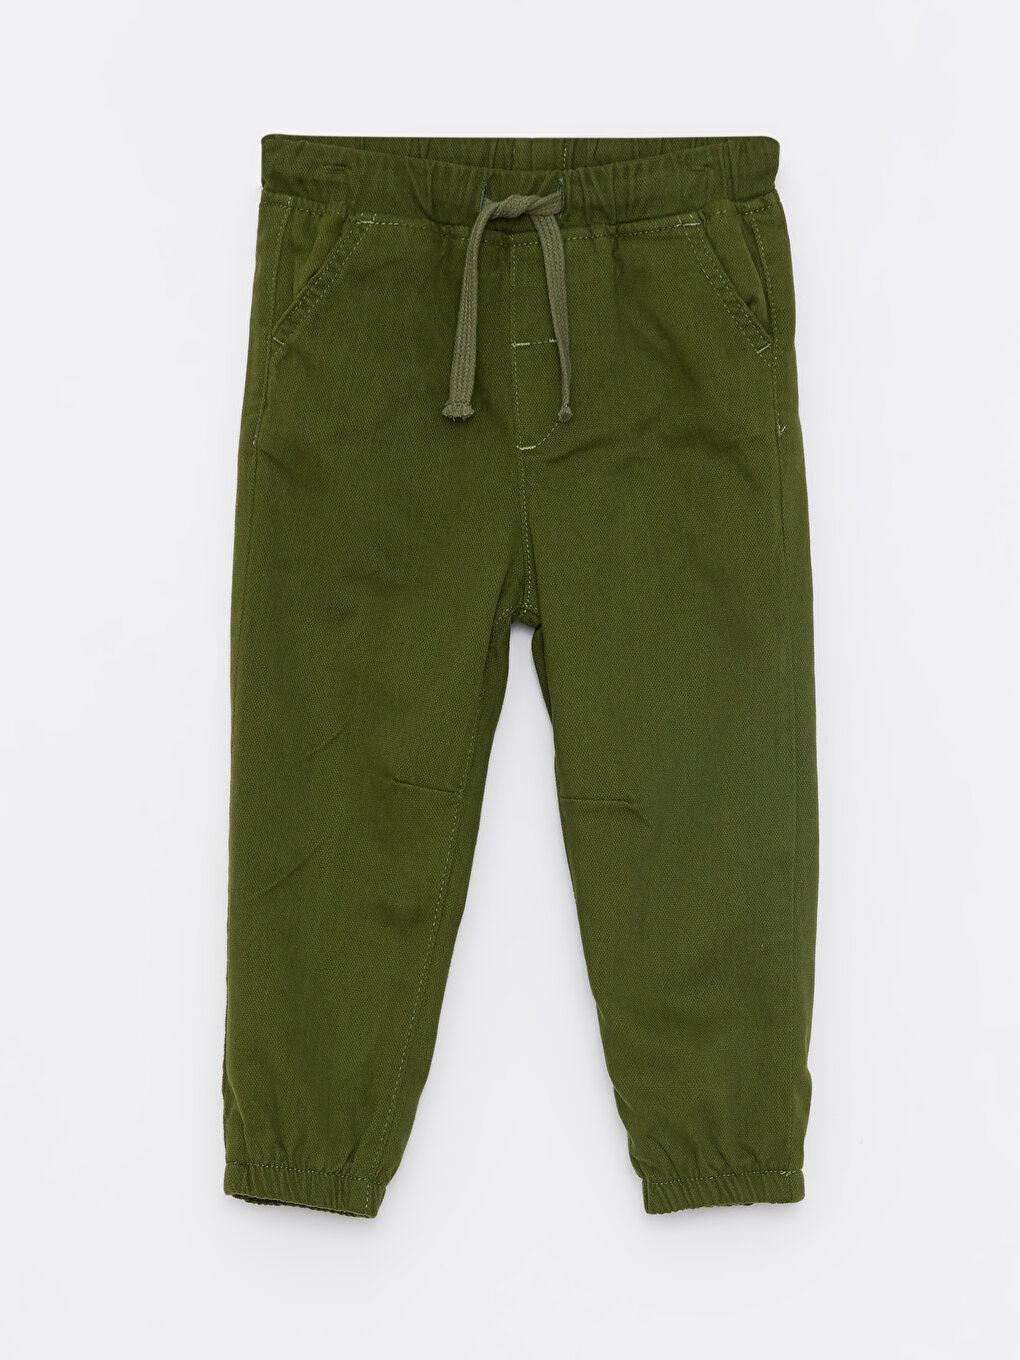 Chino Trousers, Easy to Slip On, for Boys - green medium solid with desig,  Boys